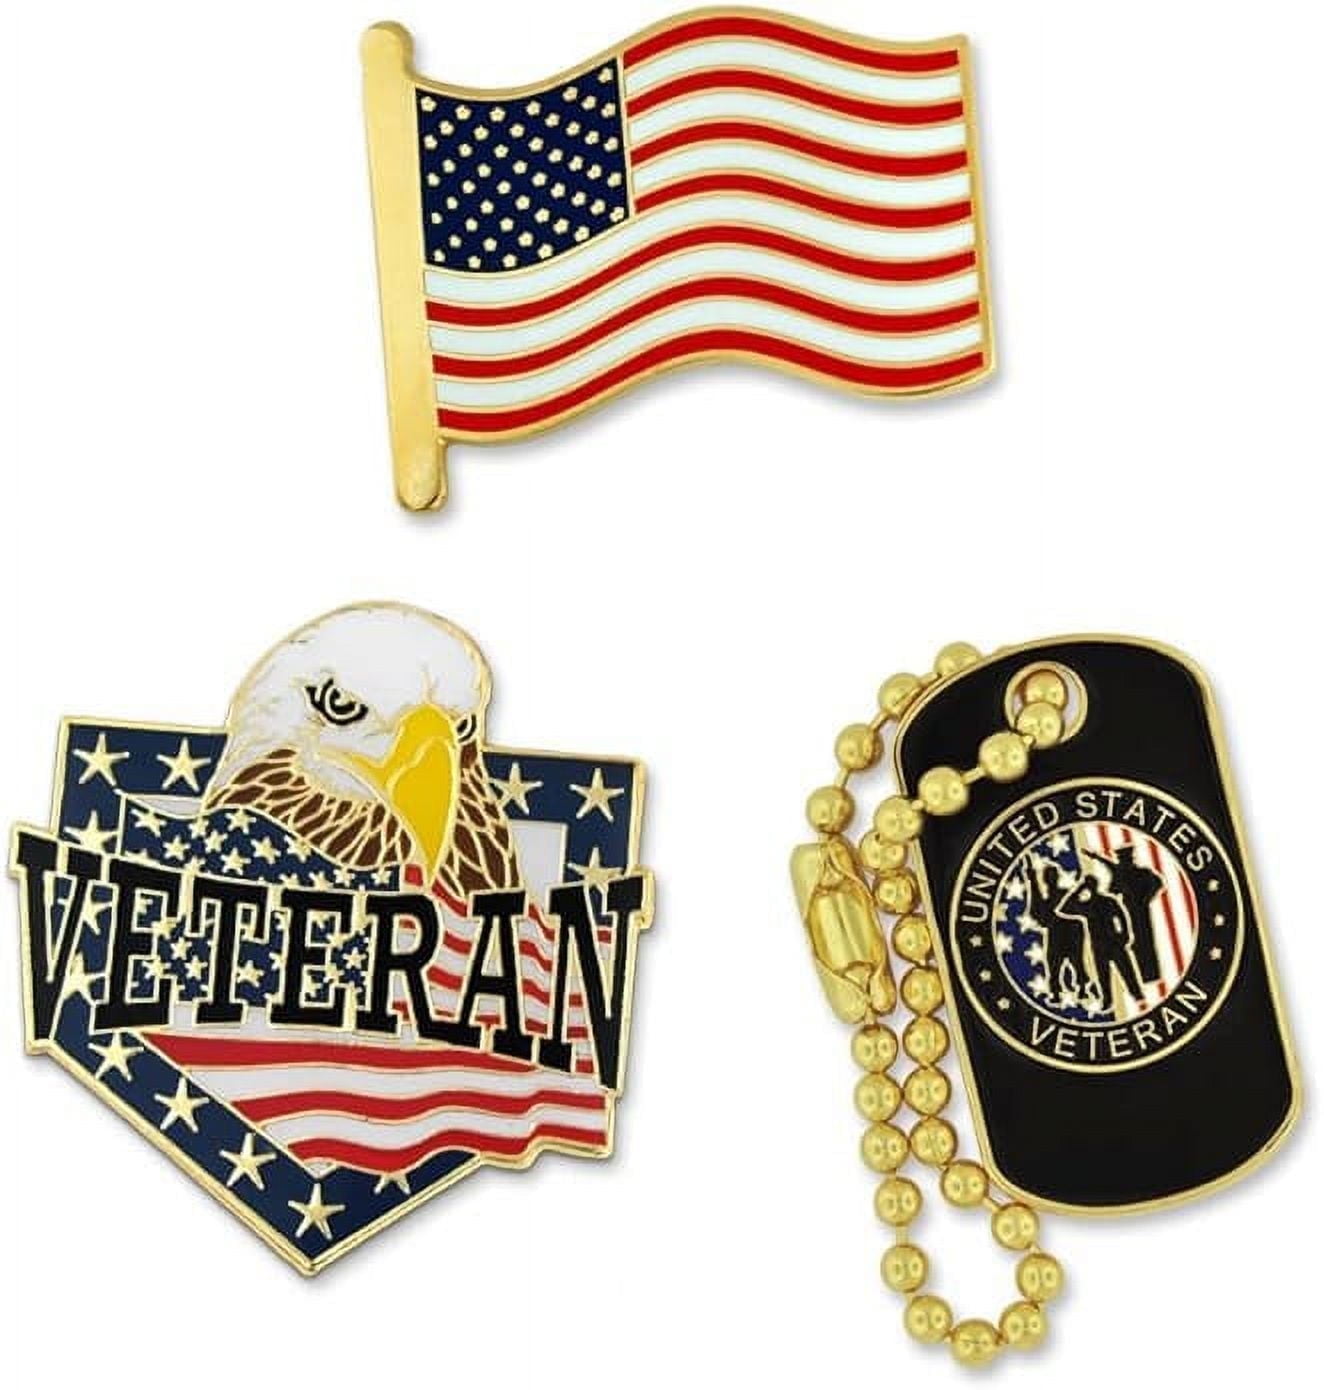 Pin on USA Proud to Wear!!